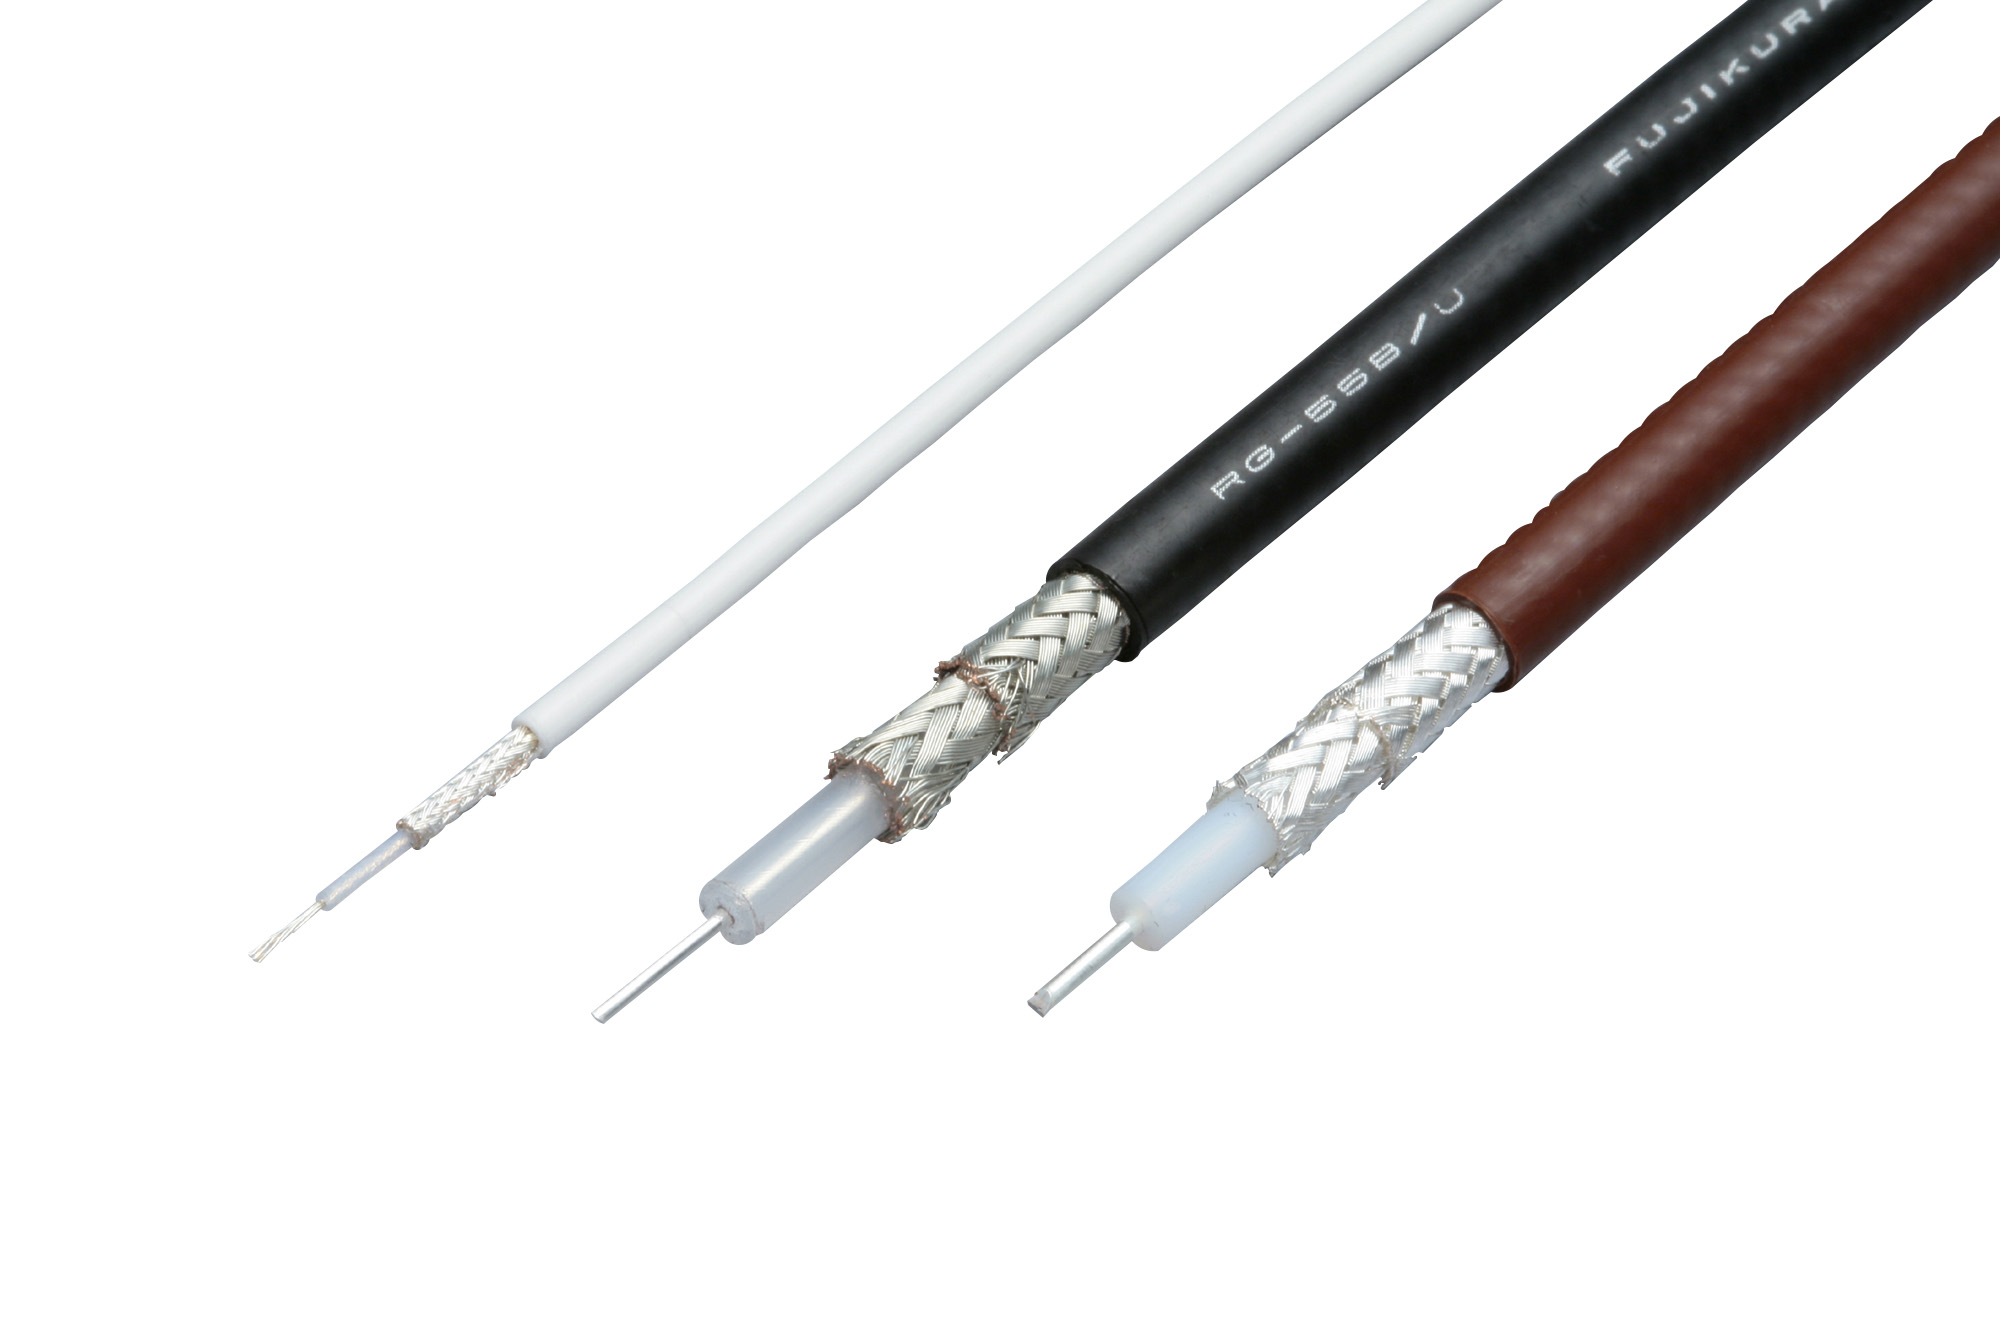 RG Type High Frequency Coaxial Cable (RG-58AU-10) 